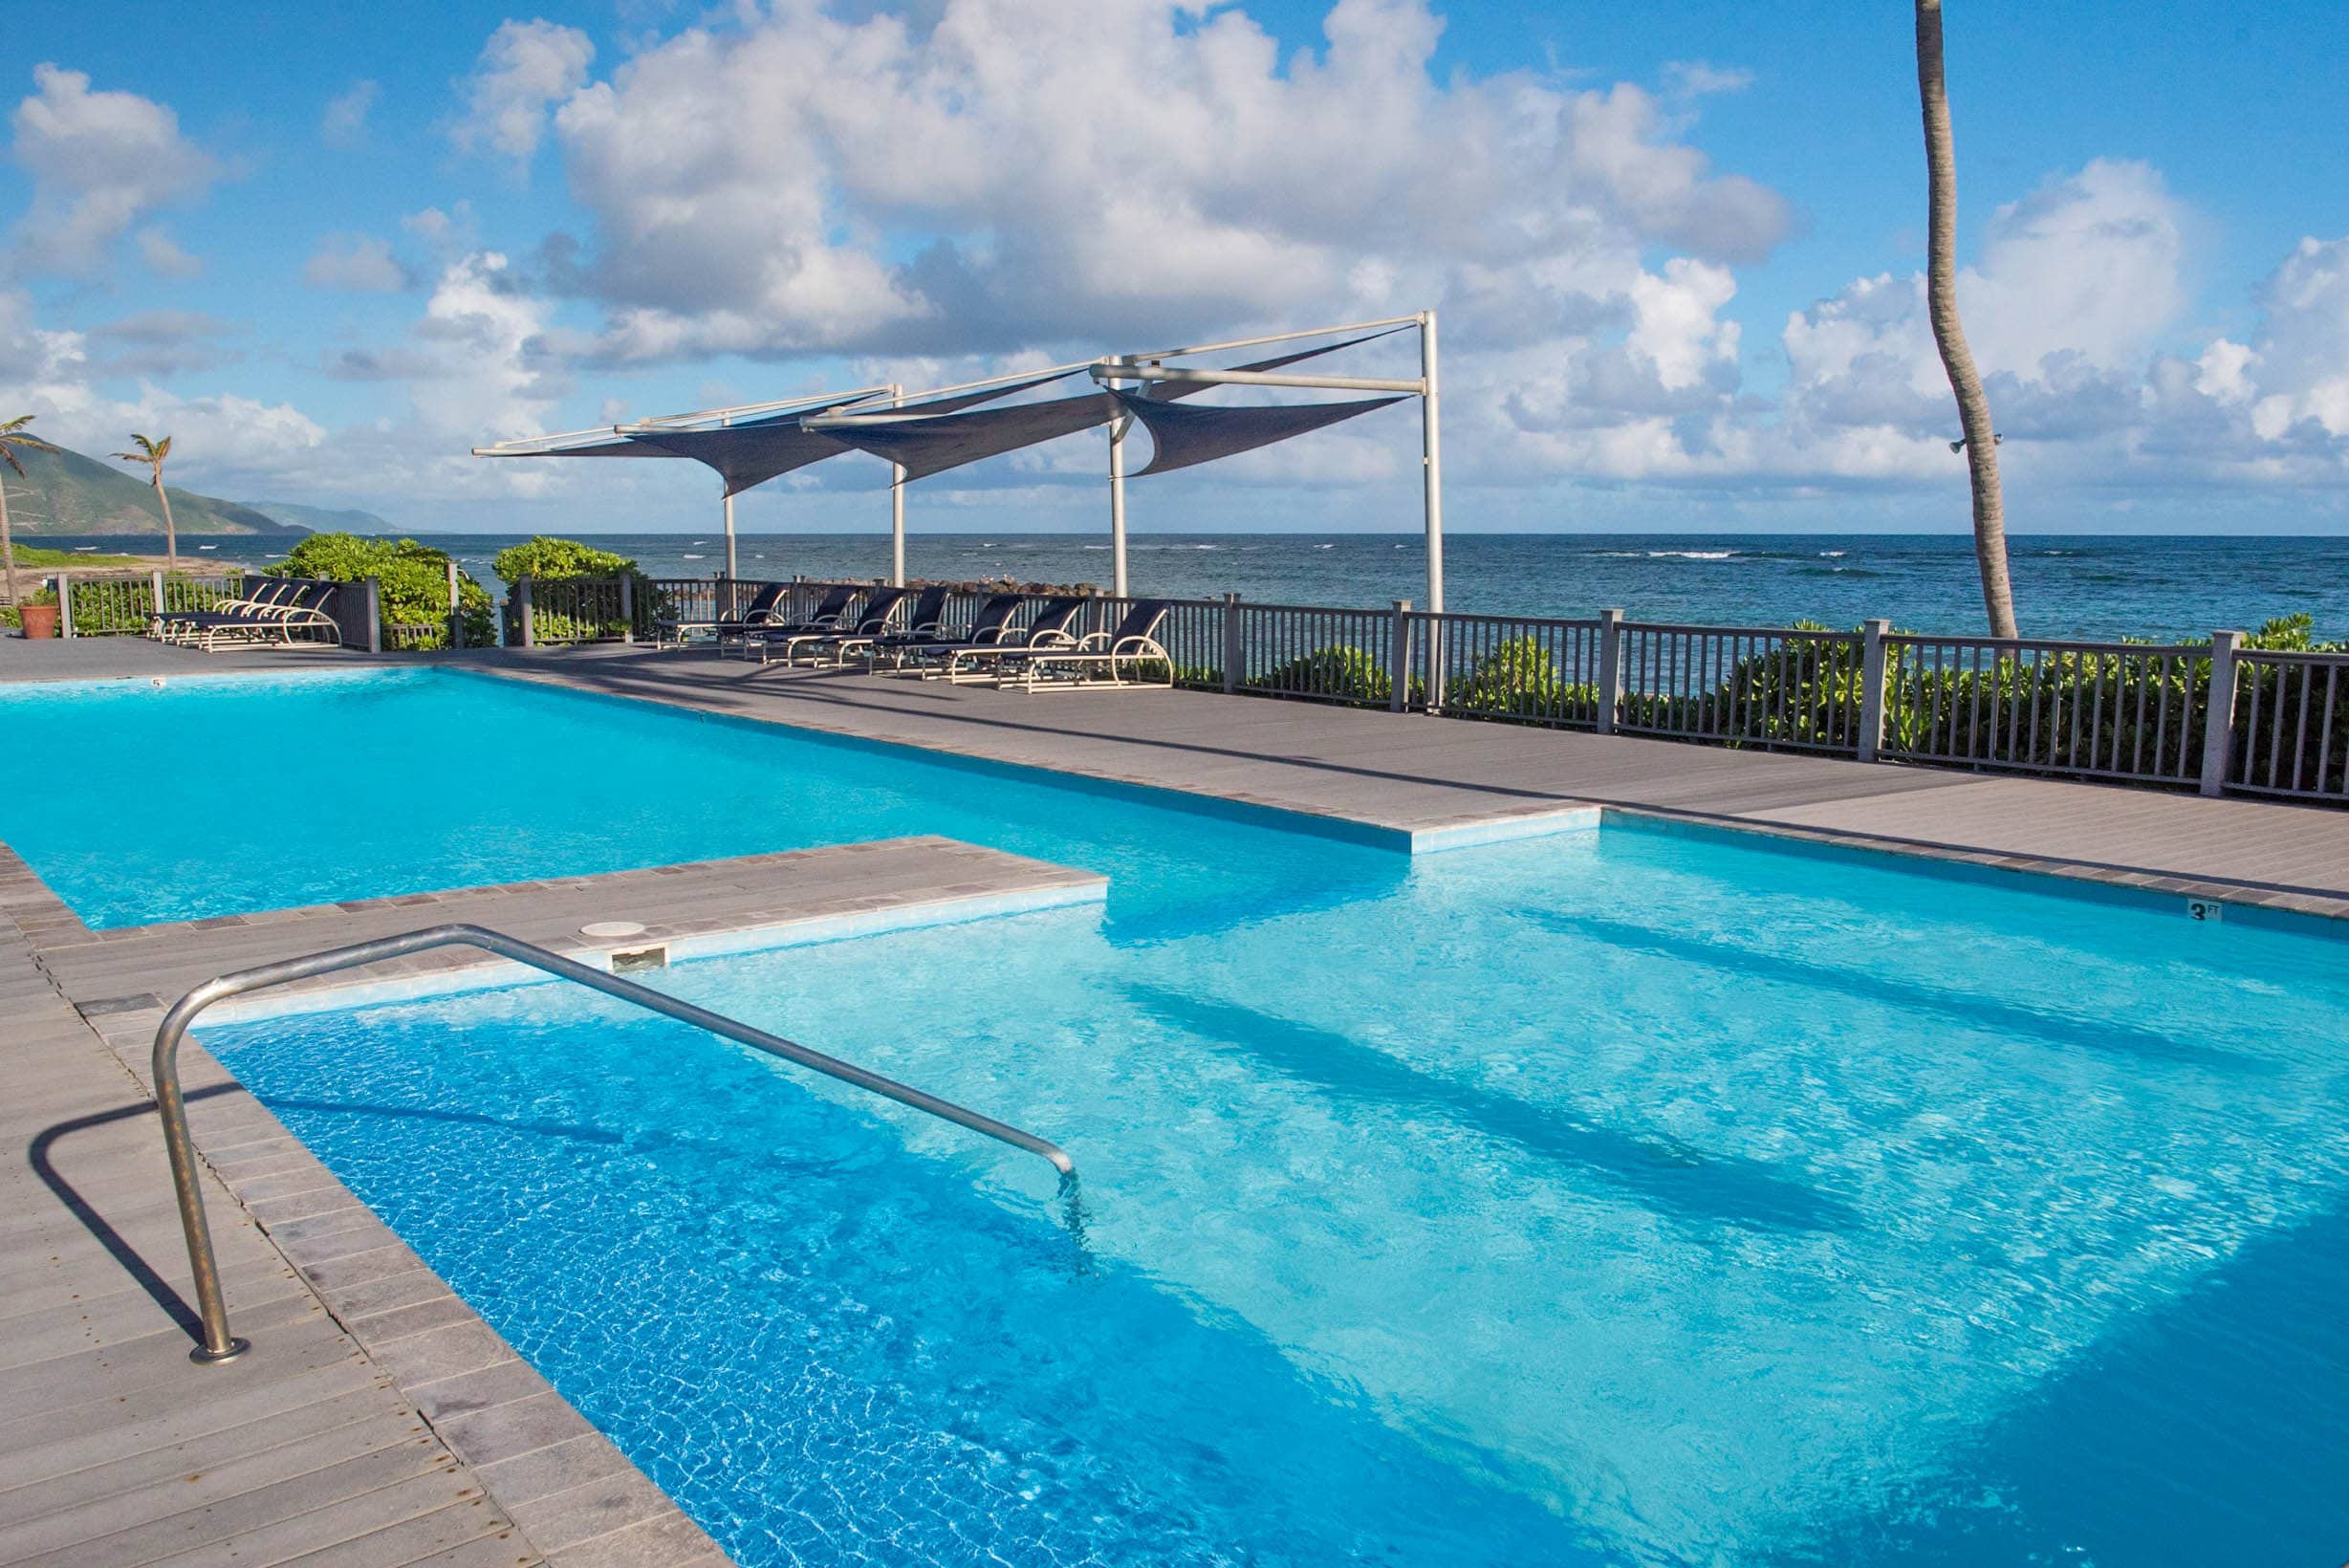 The pool area is simply stunning against the cool Caribbean Sea beyond.